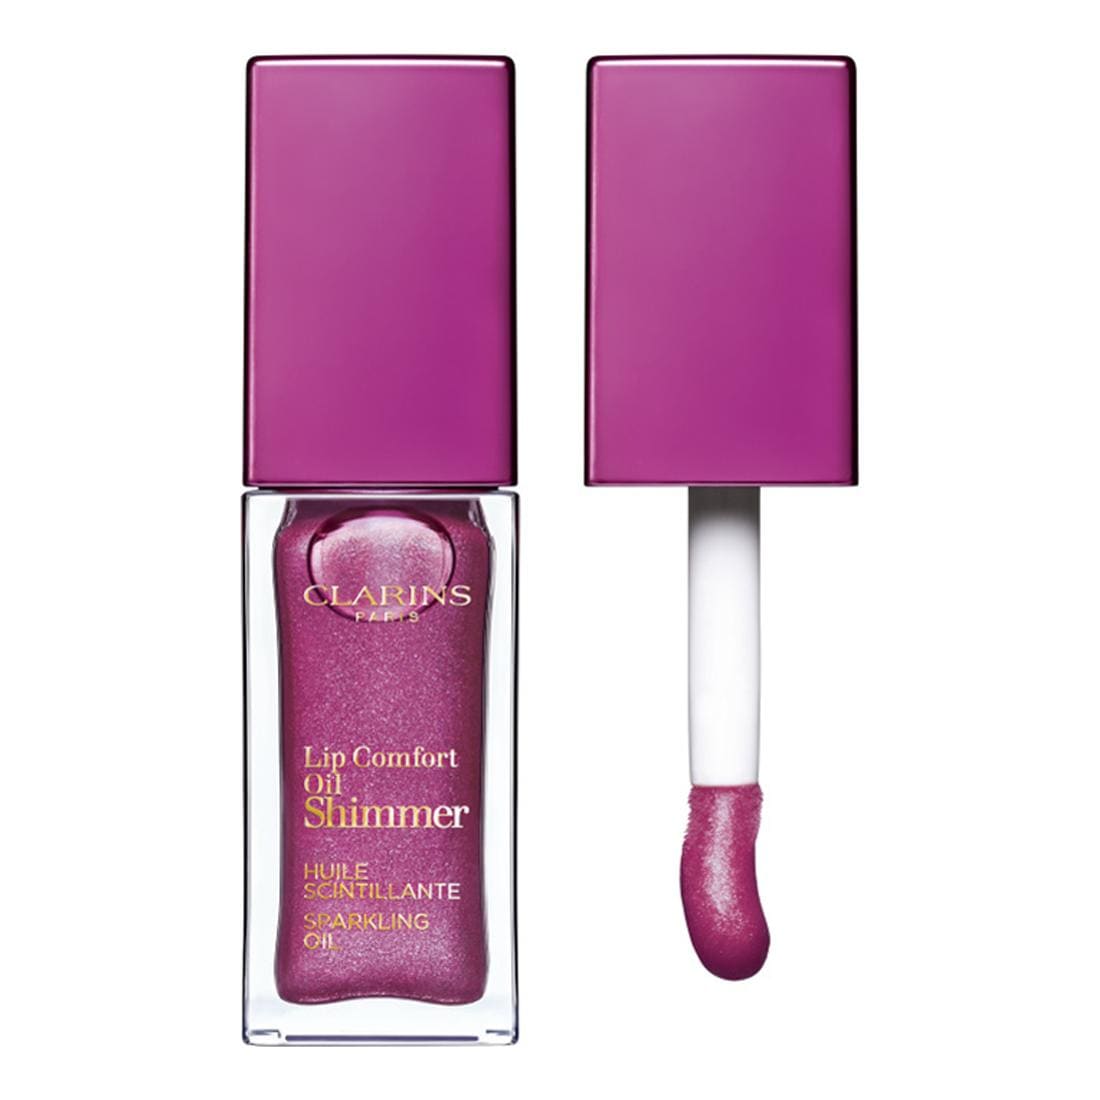 Clarins Lip Comfort Oil Shimmer, No. 03 - Funky Raspberry